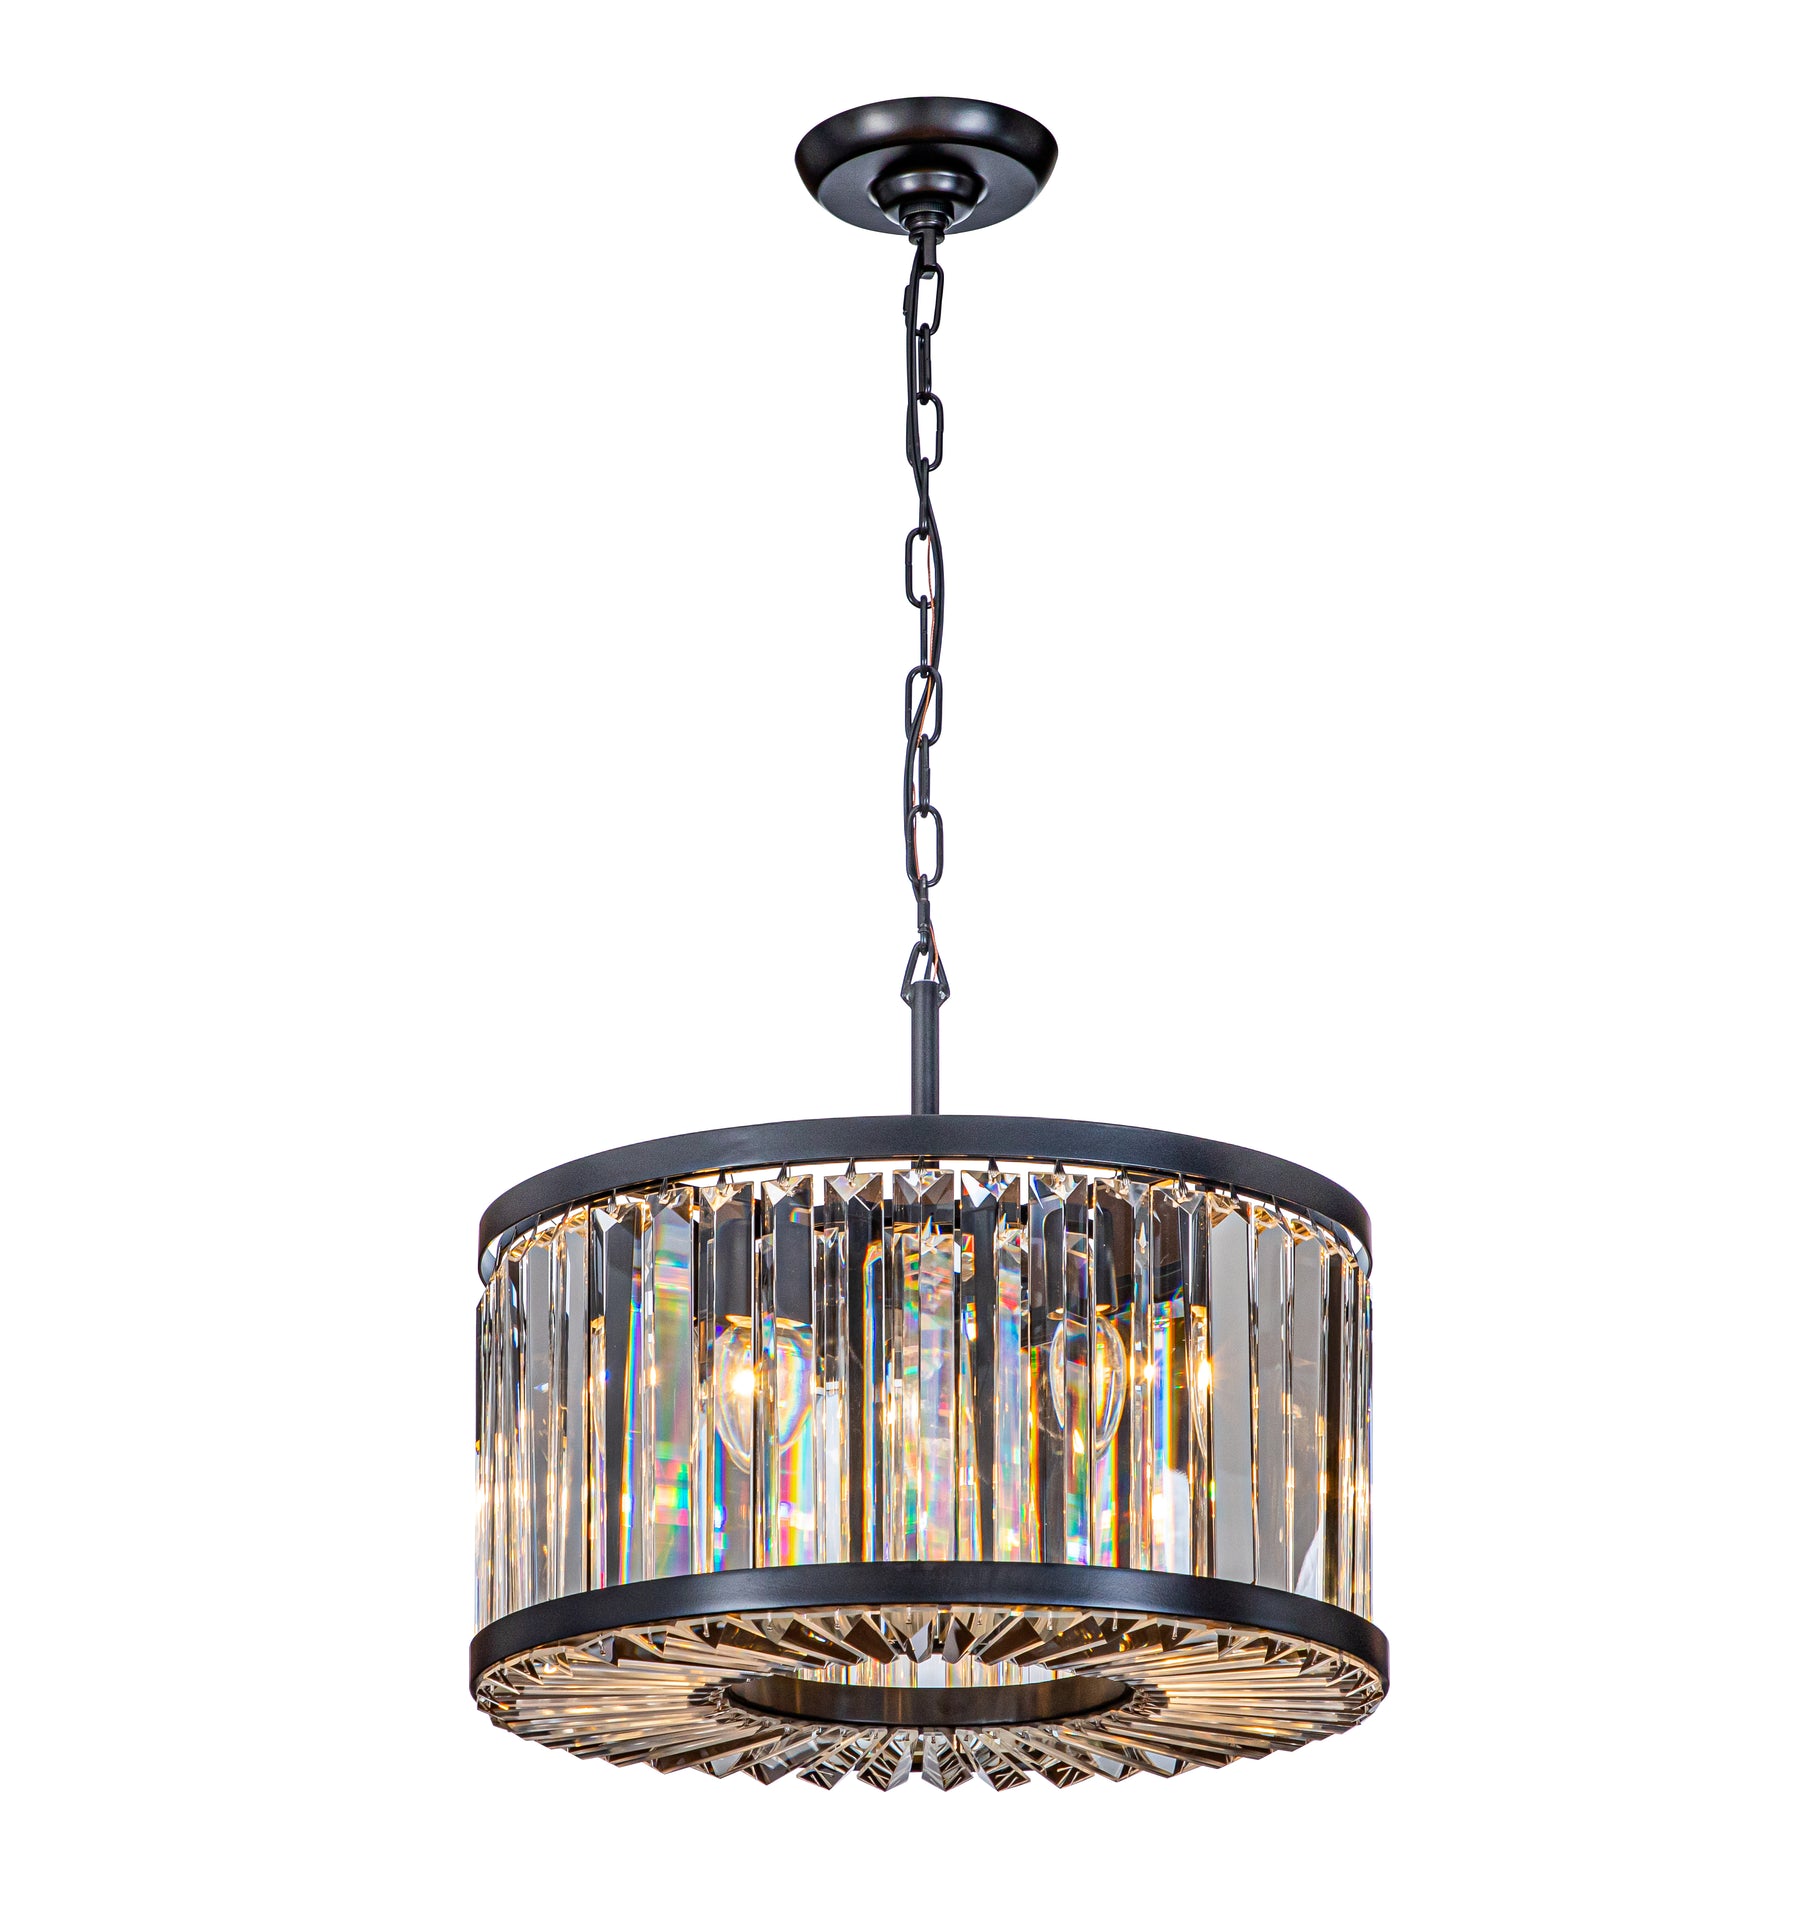 4-Light Modern Black And Round Lantern Drum Chandelier With Wrought Iron Crystal Accents